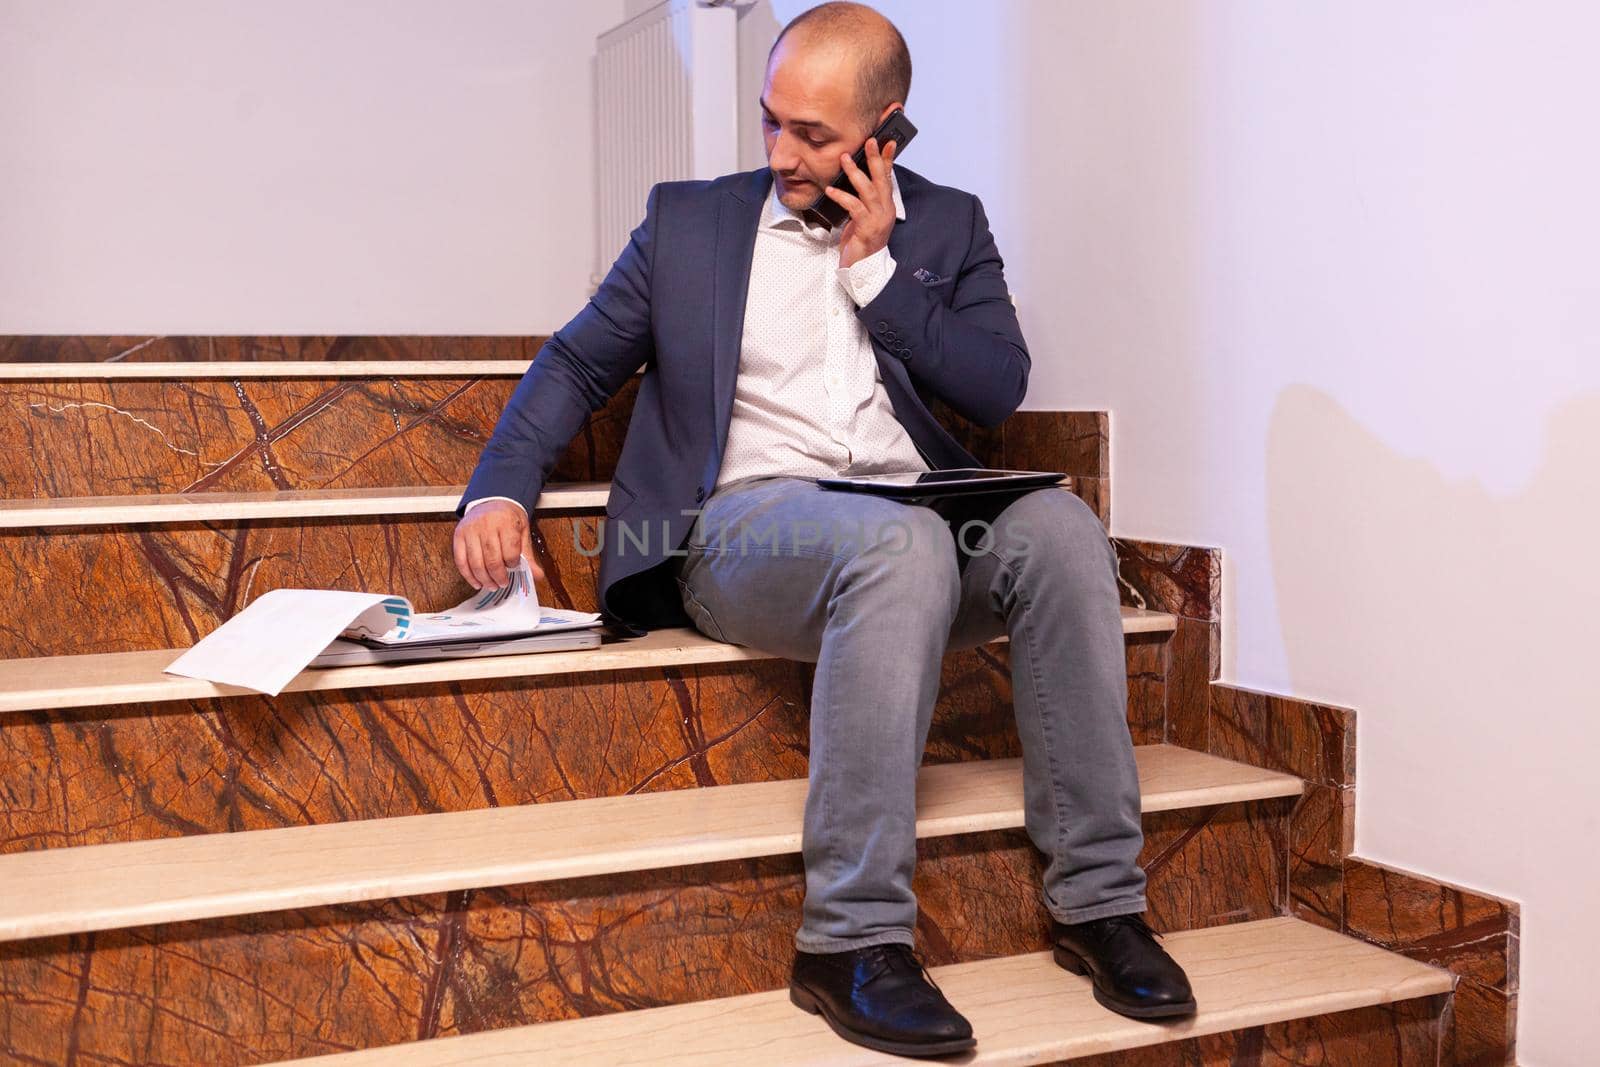 Exhausted overworked businessman talking on phone with team about project deadline.Entrepreneur working late in evening corporate sitting on stairs in building office.